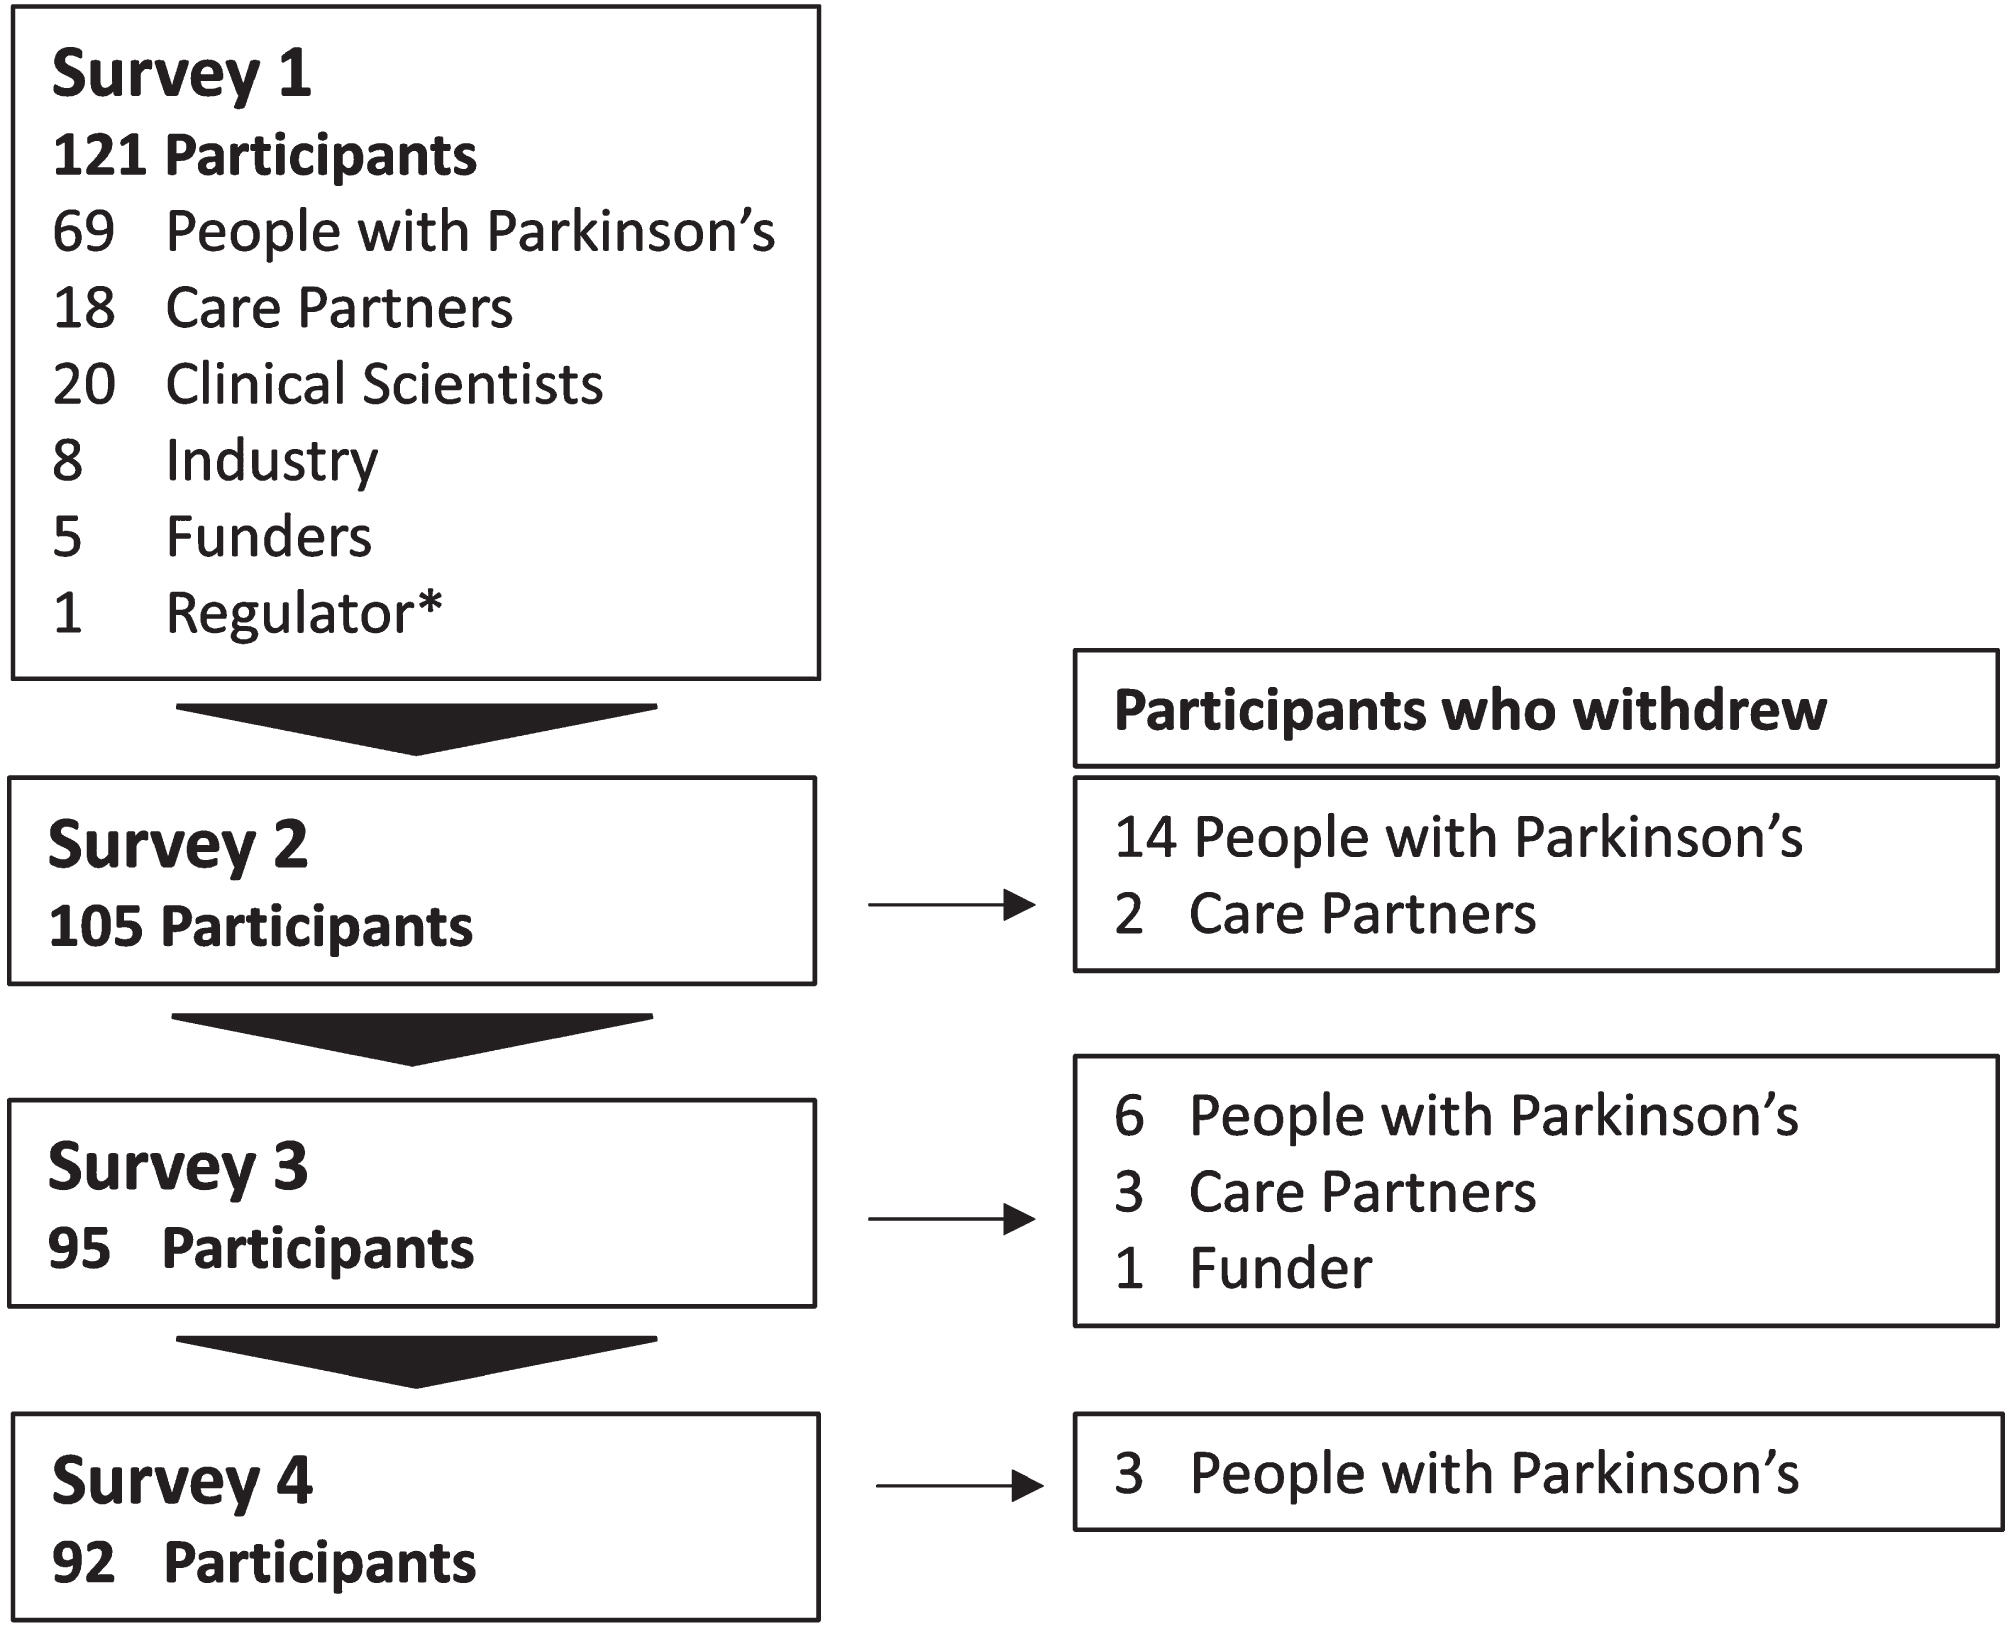 Study participation. The number of participants and those who withdrew by participant group over 4 surveys.